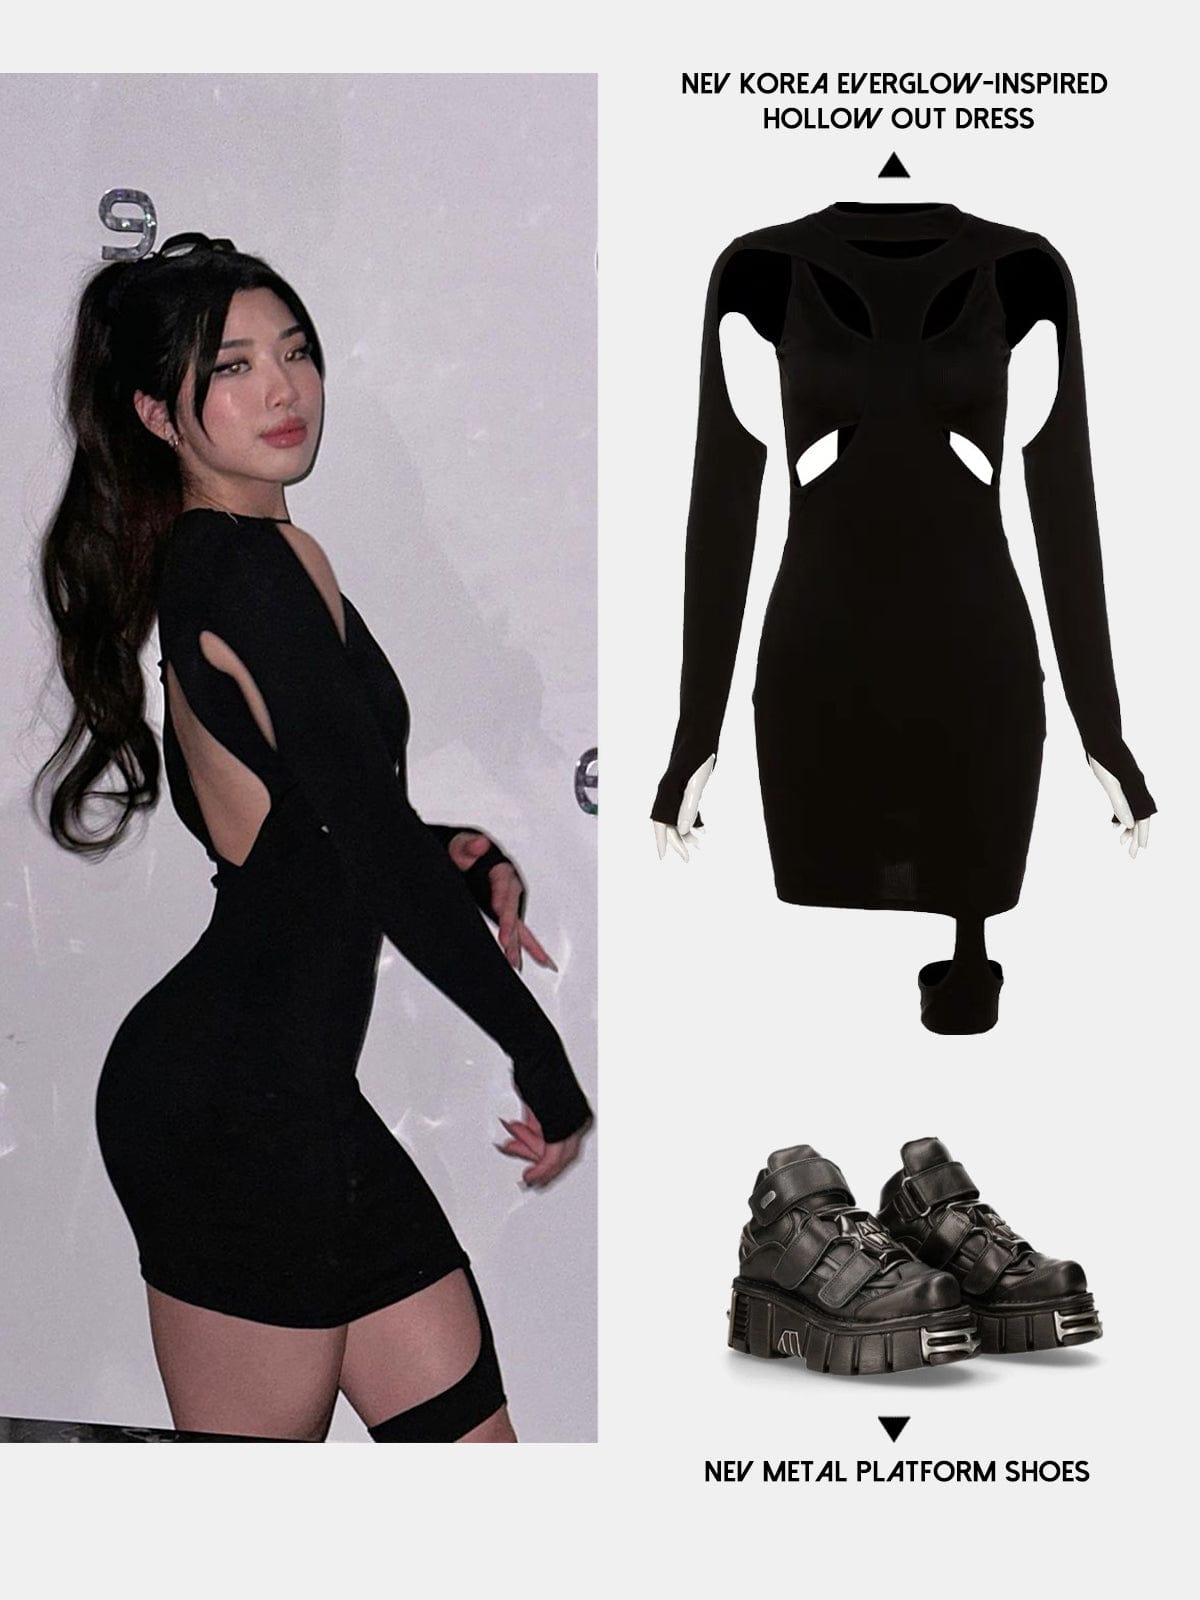 TO Korea EVERGLOW-inspired Hollow Out Dress